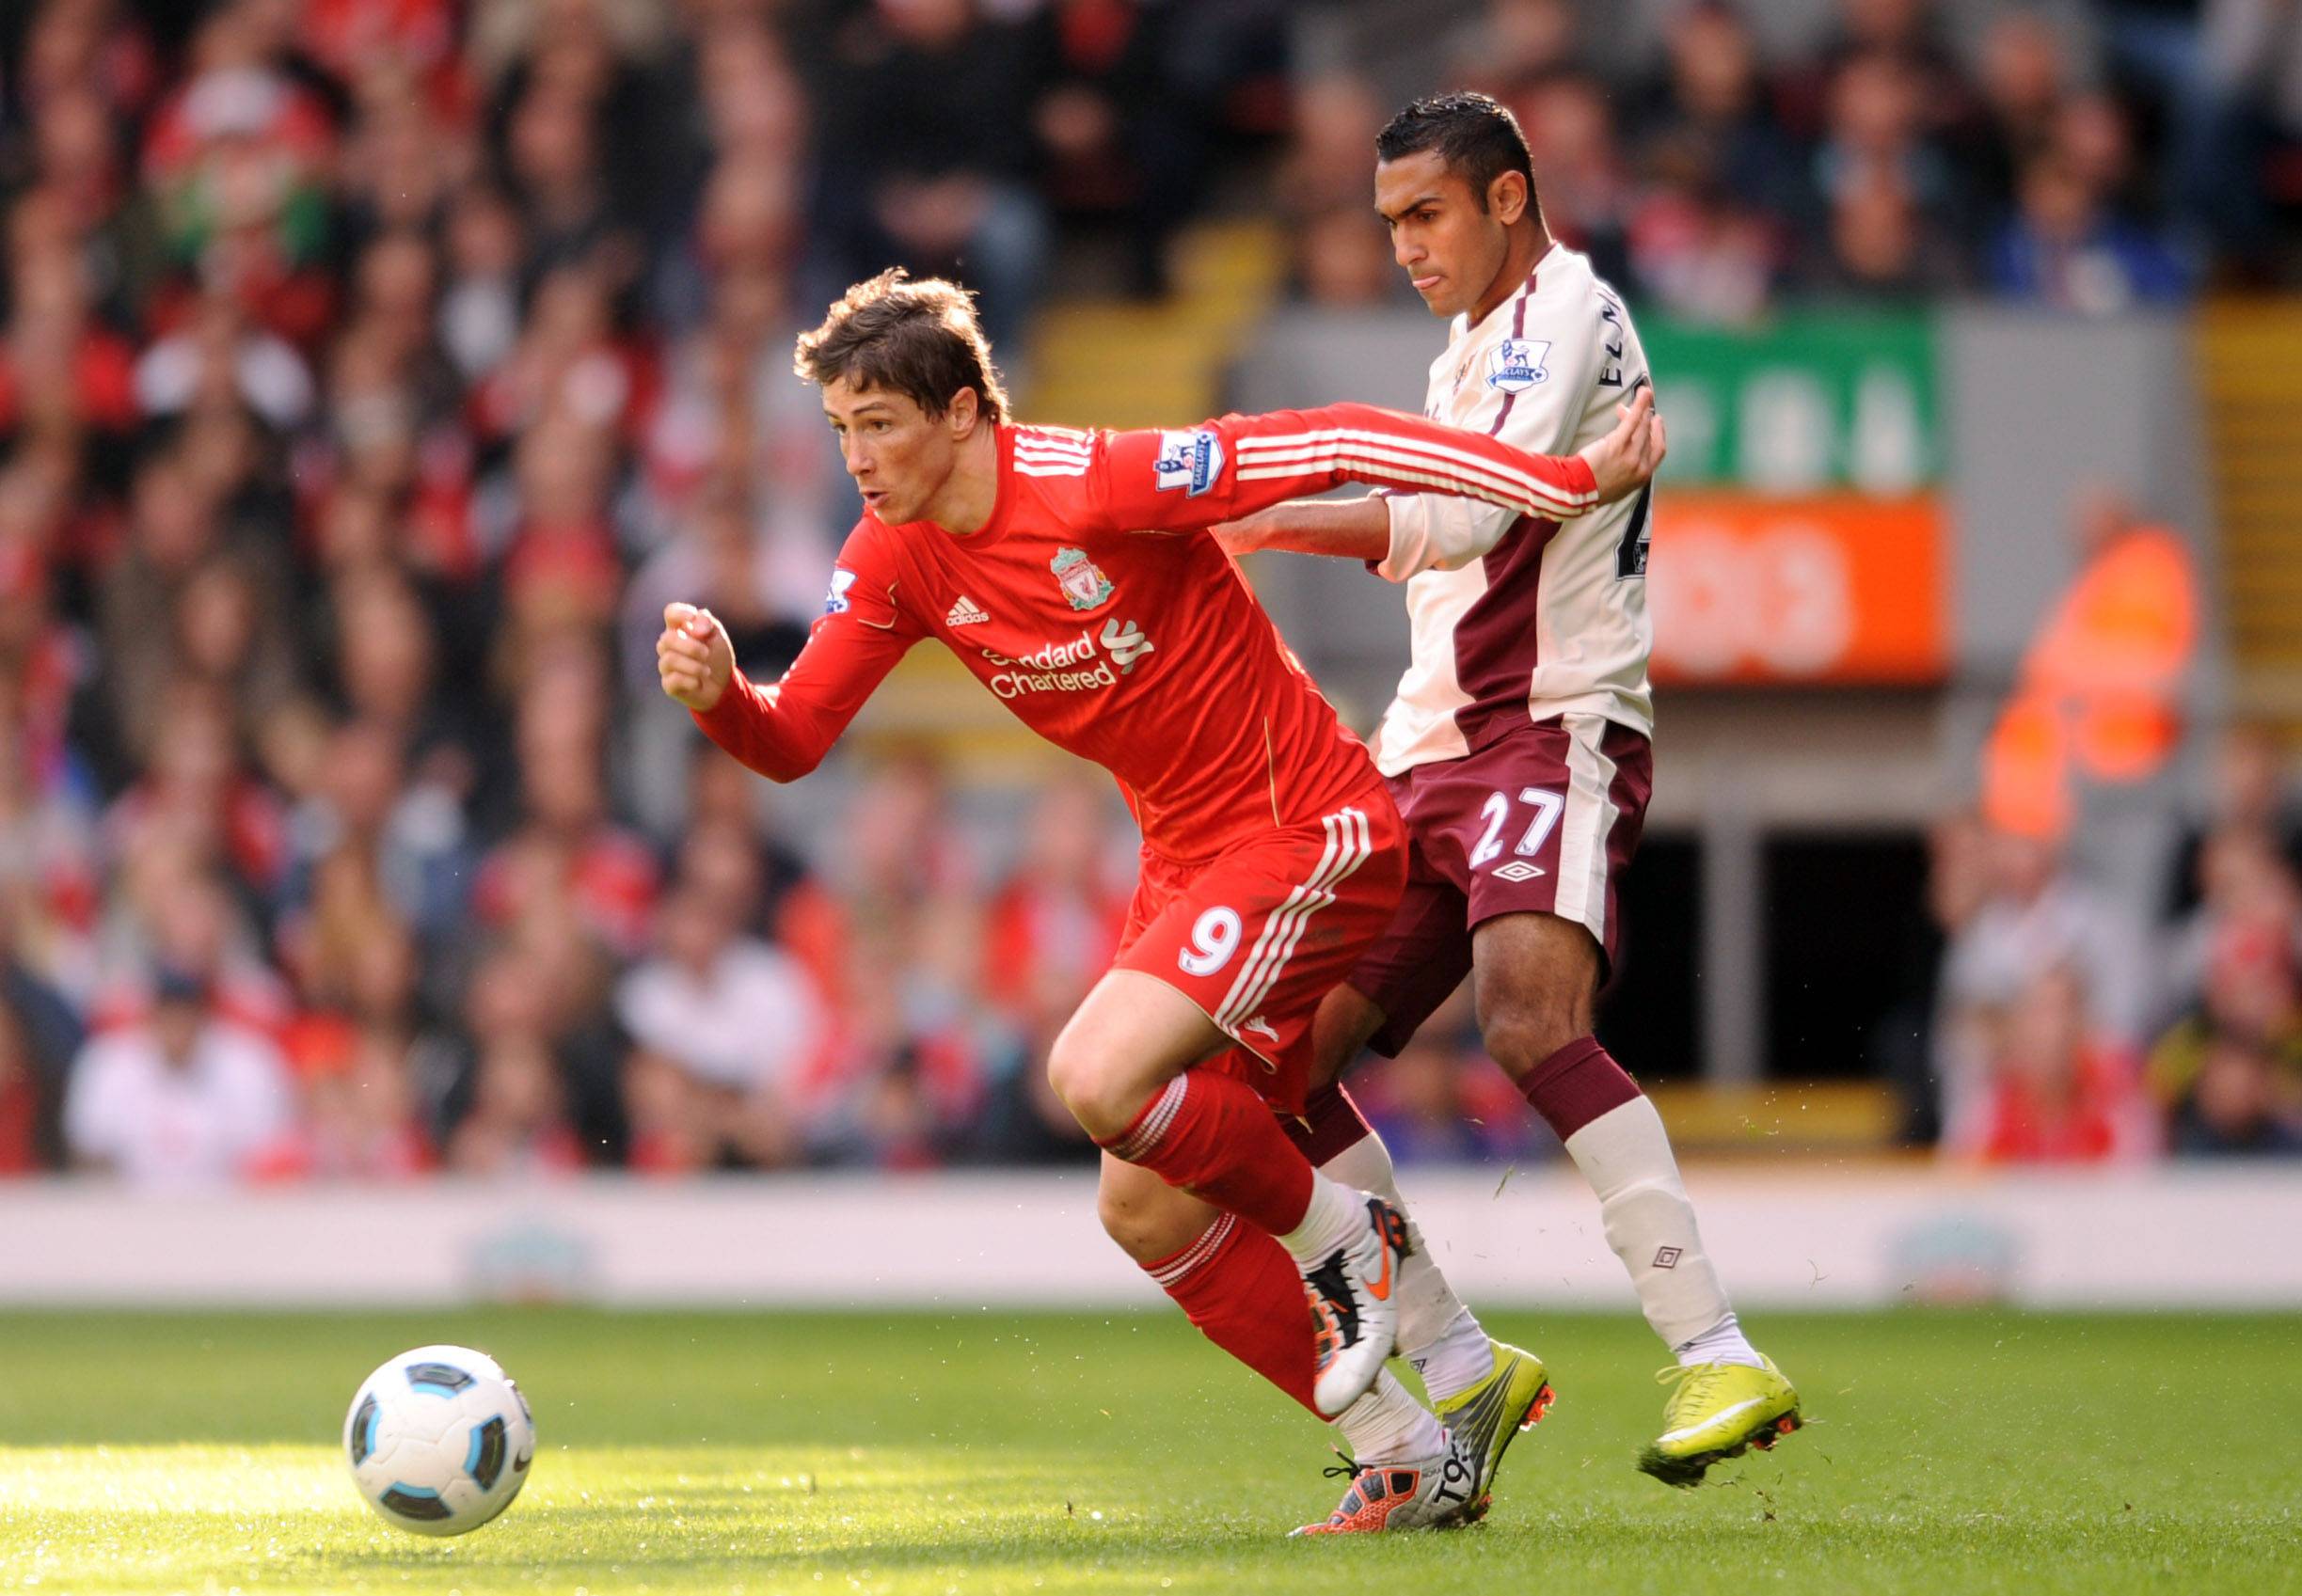 Torres in action for Liverpool.